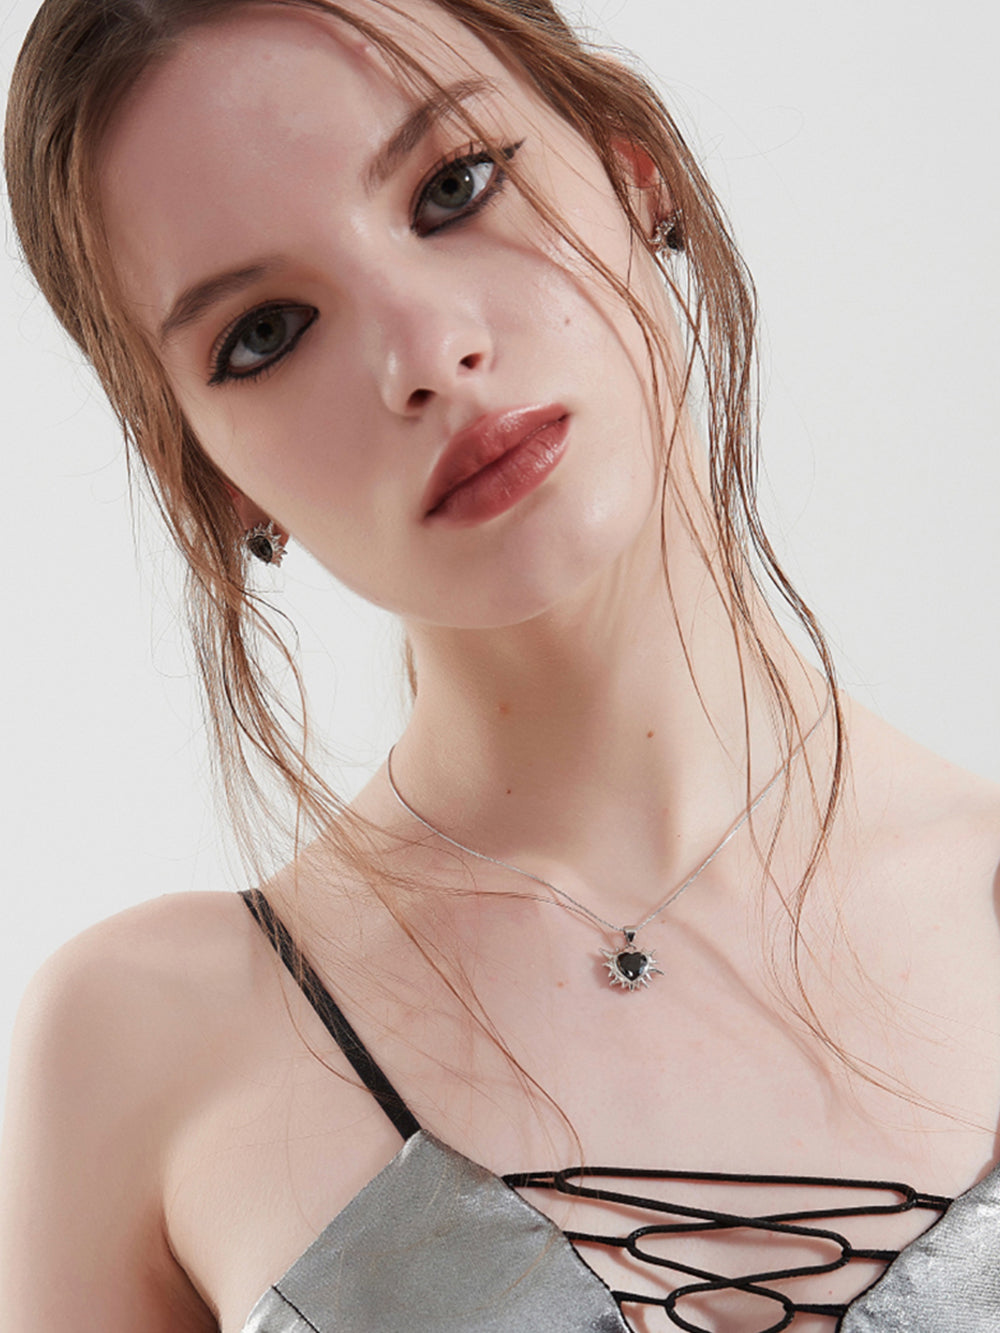 MUKTANK×WHITEHOLE Love Me Thorn Silver Necklace